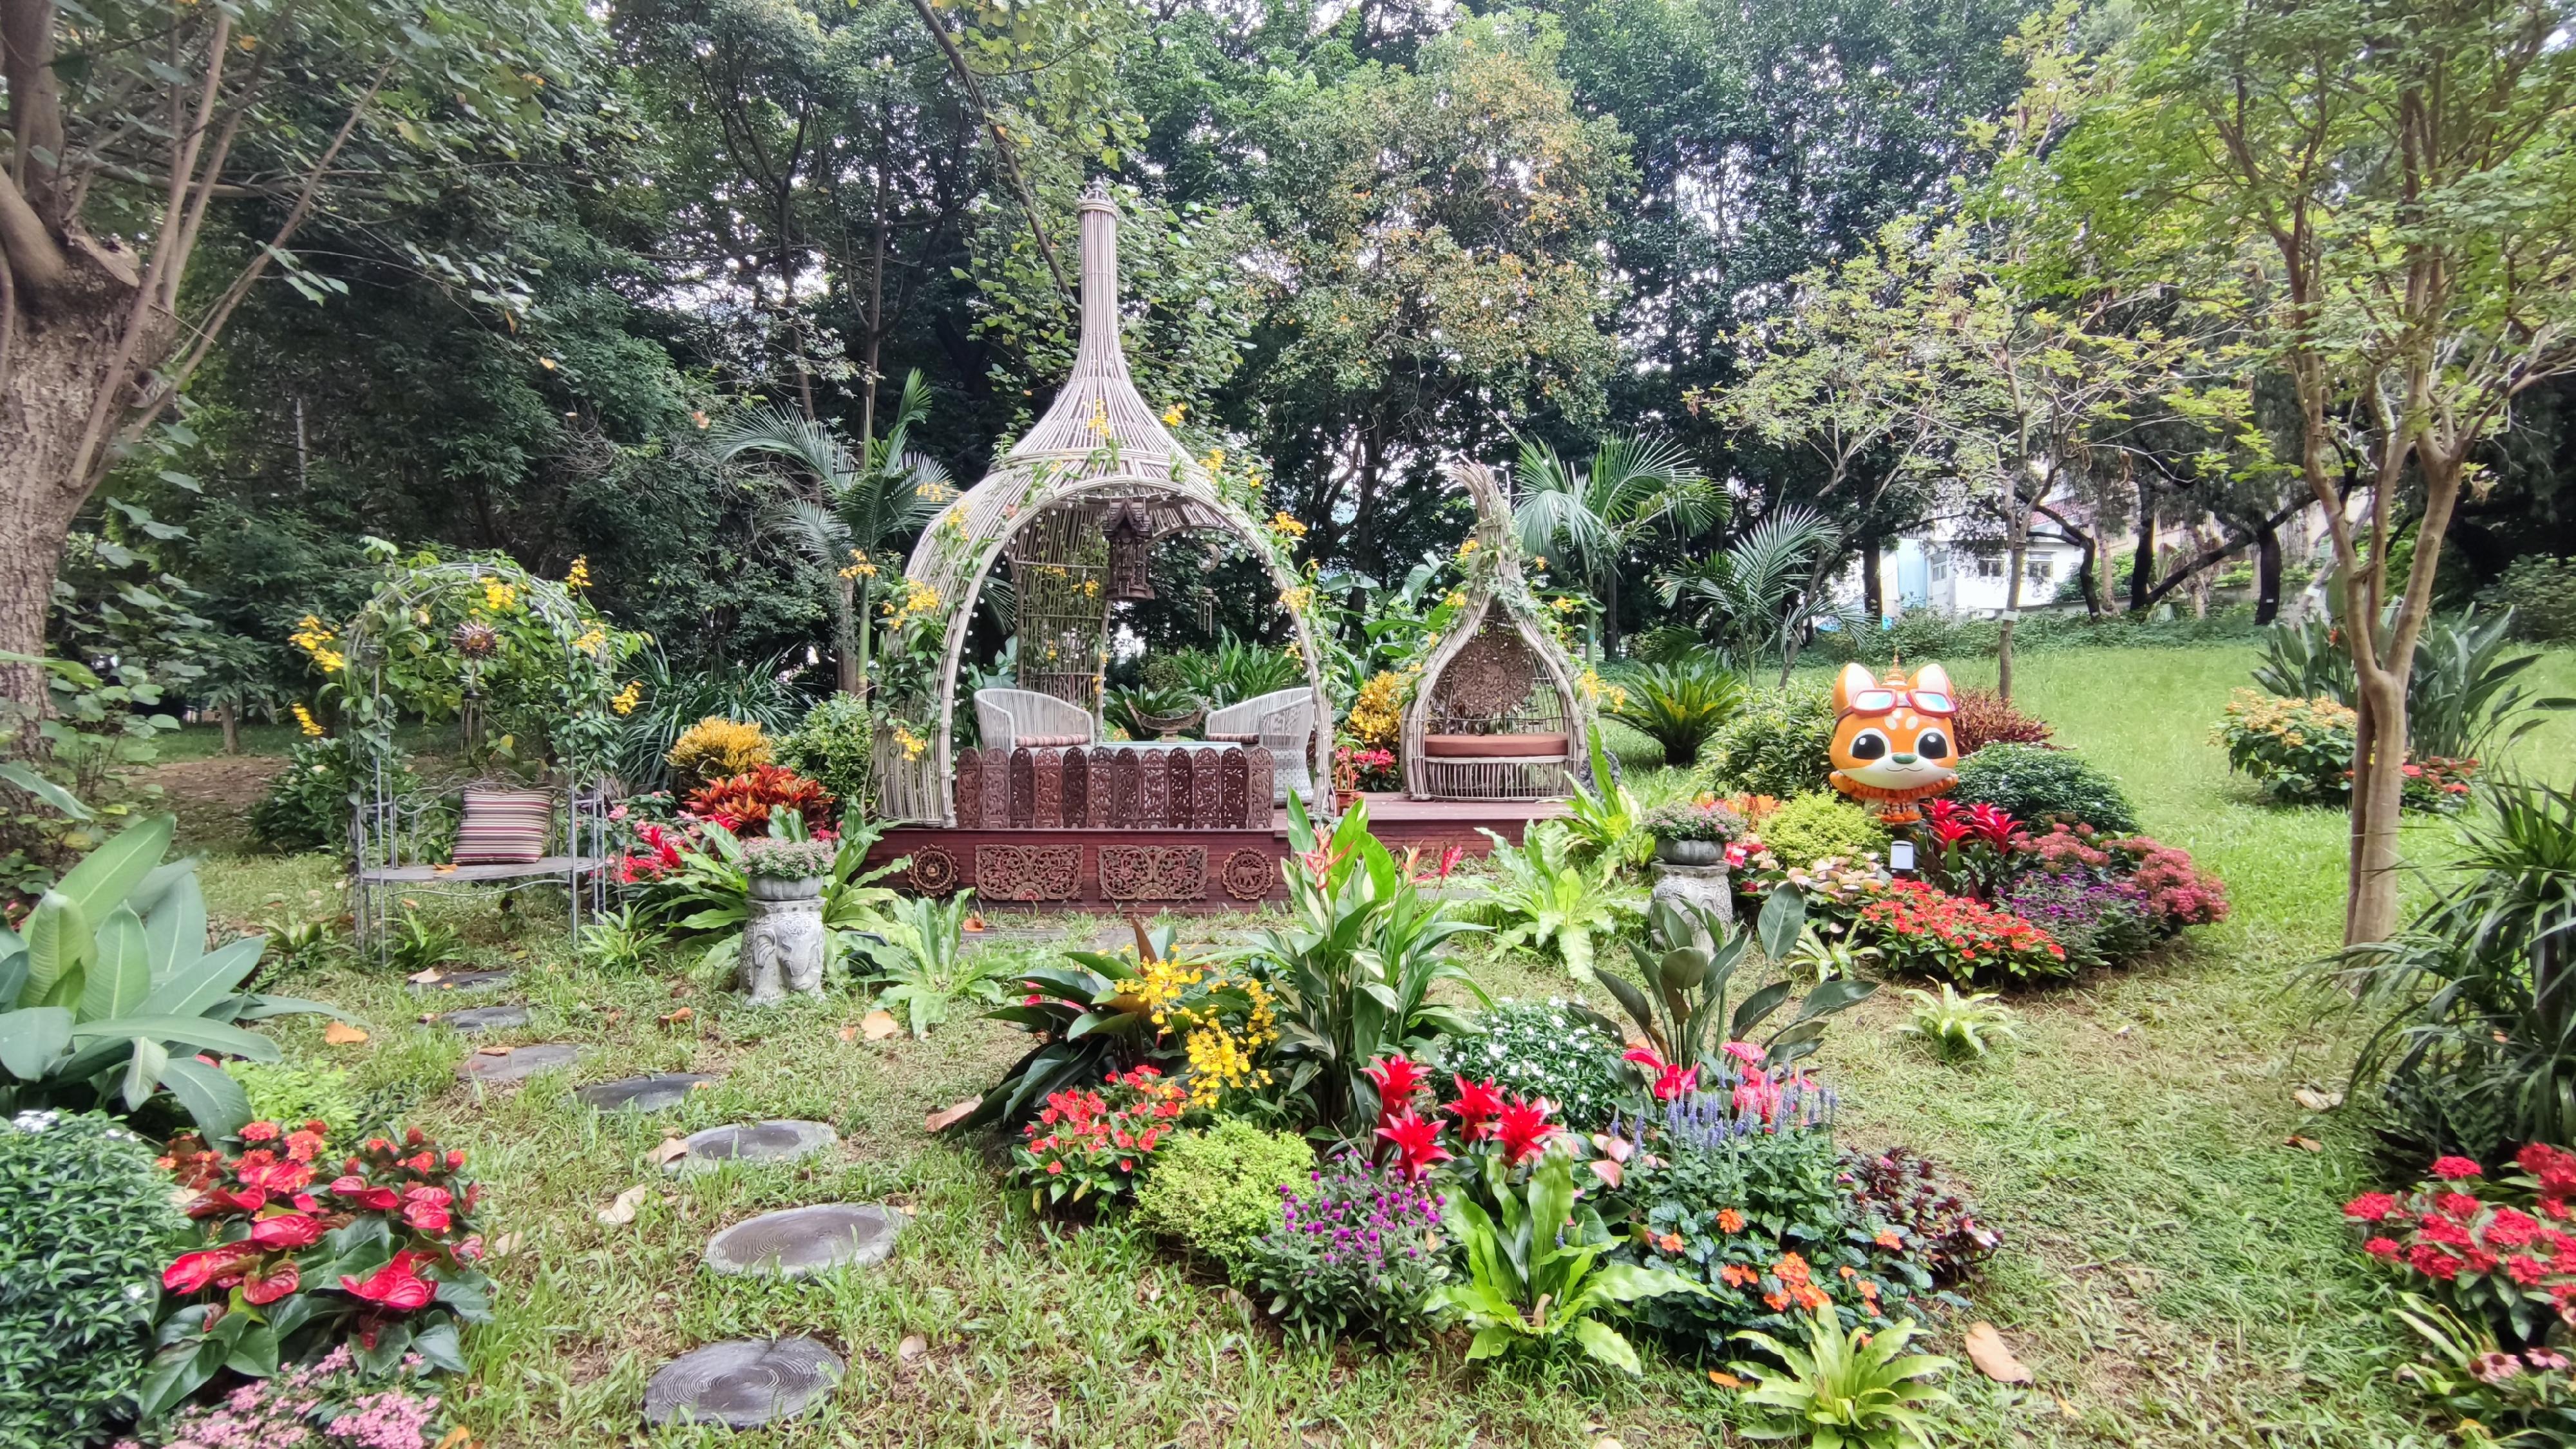 The Leisure and Cultural Services Department today (September 9) implemented phase three of the Blossom Around Town programme. Themed garden plots with Oriental and Western styles will be set up at designated parks in the 18 districts for public appreciation. Photo shows an Oriental style themed garden plot, "Long Vacation", at Yeung Siu Hang Garden in Tuen Mun.
